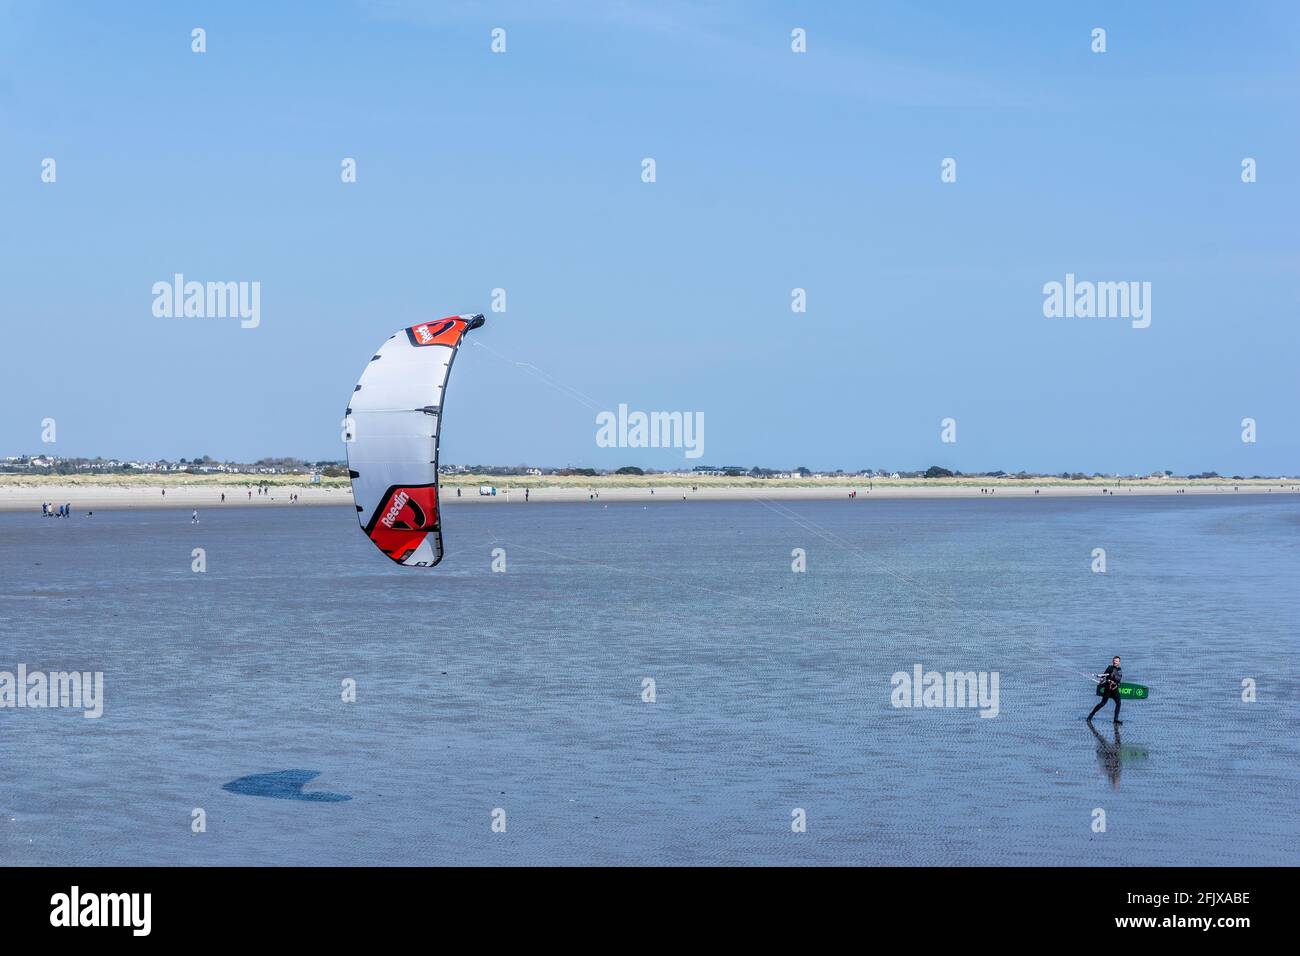 Kite Surfing. A lone kite surfer on Dollymount Strand in Dublin, Ireland heading towards the water. Stock Photo